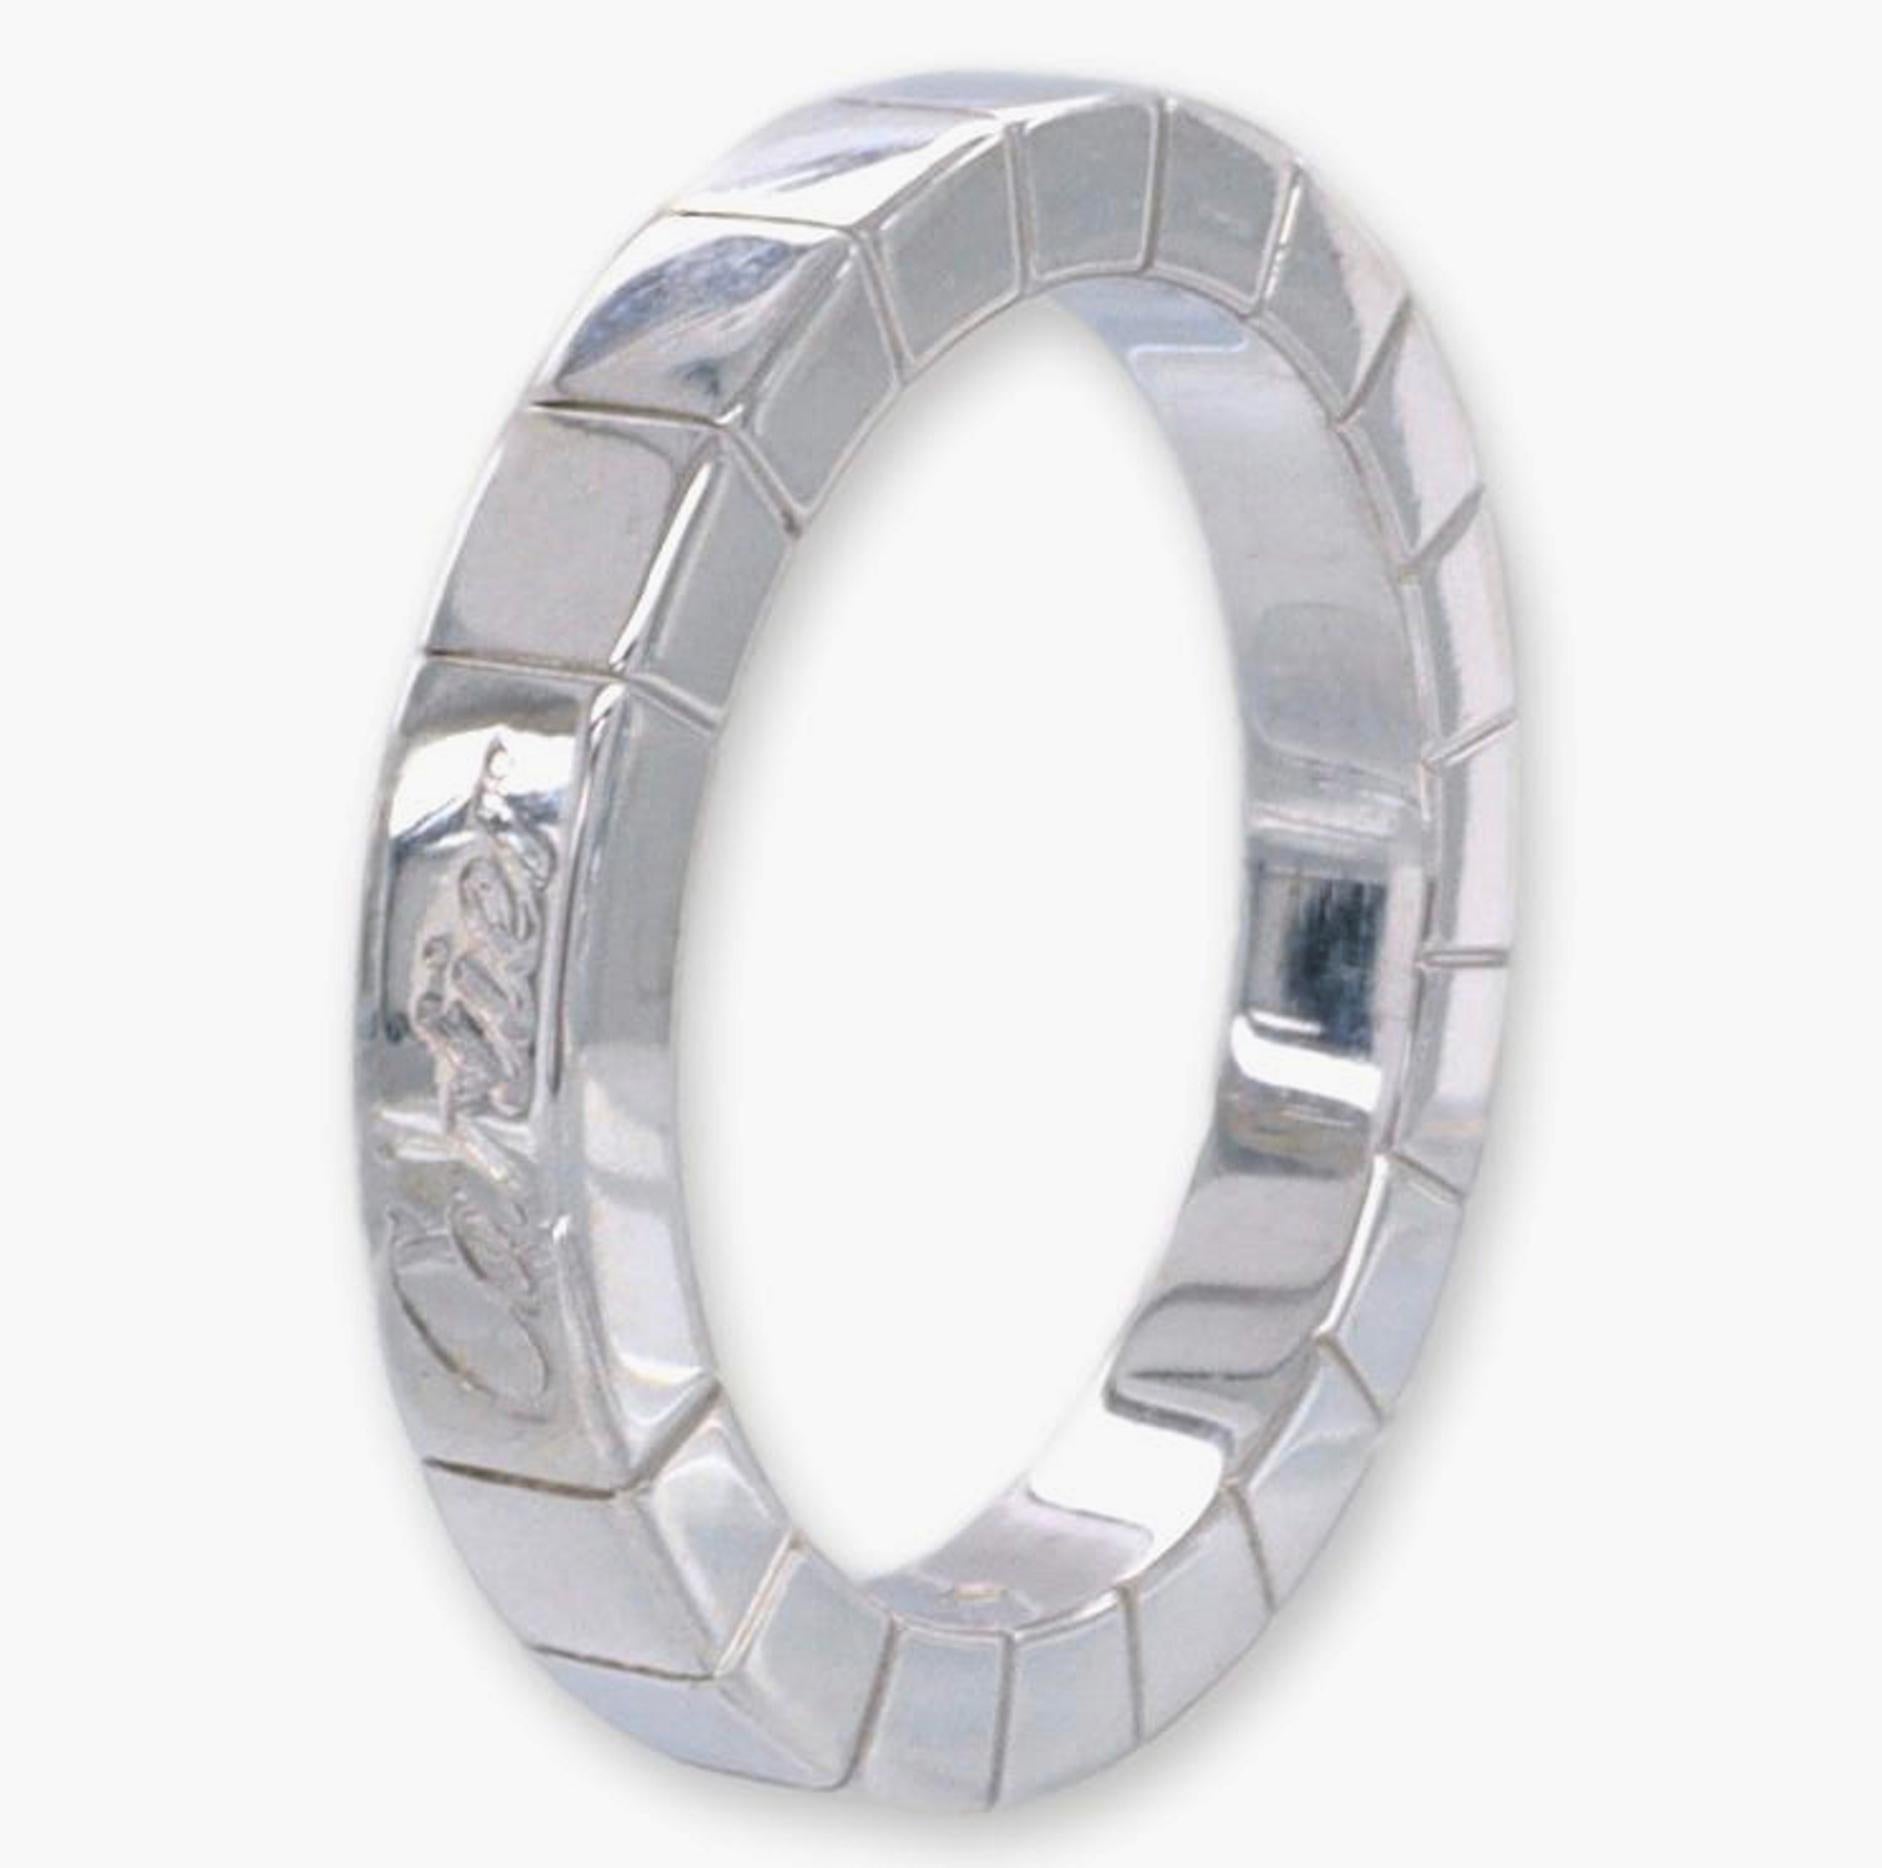 Vintage Cartier band ring from the Lanieres collection finely crafted in 18 karat white gold in a block all the way around design. Fully hallmarked with assay marks, logo , serial numbers and metal content.

Ring Specifications
Brand: Cartier